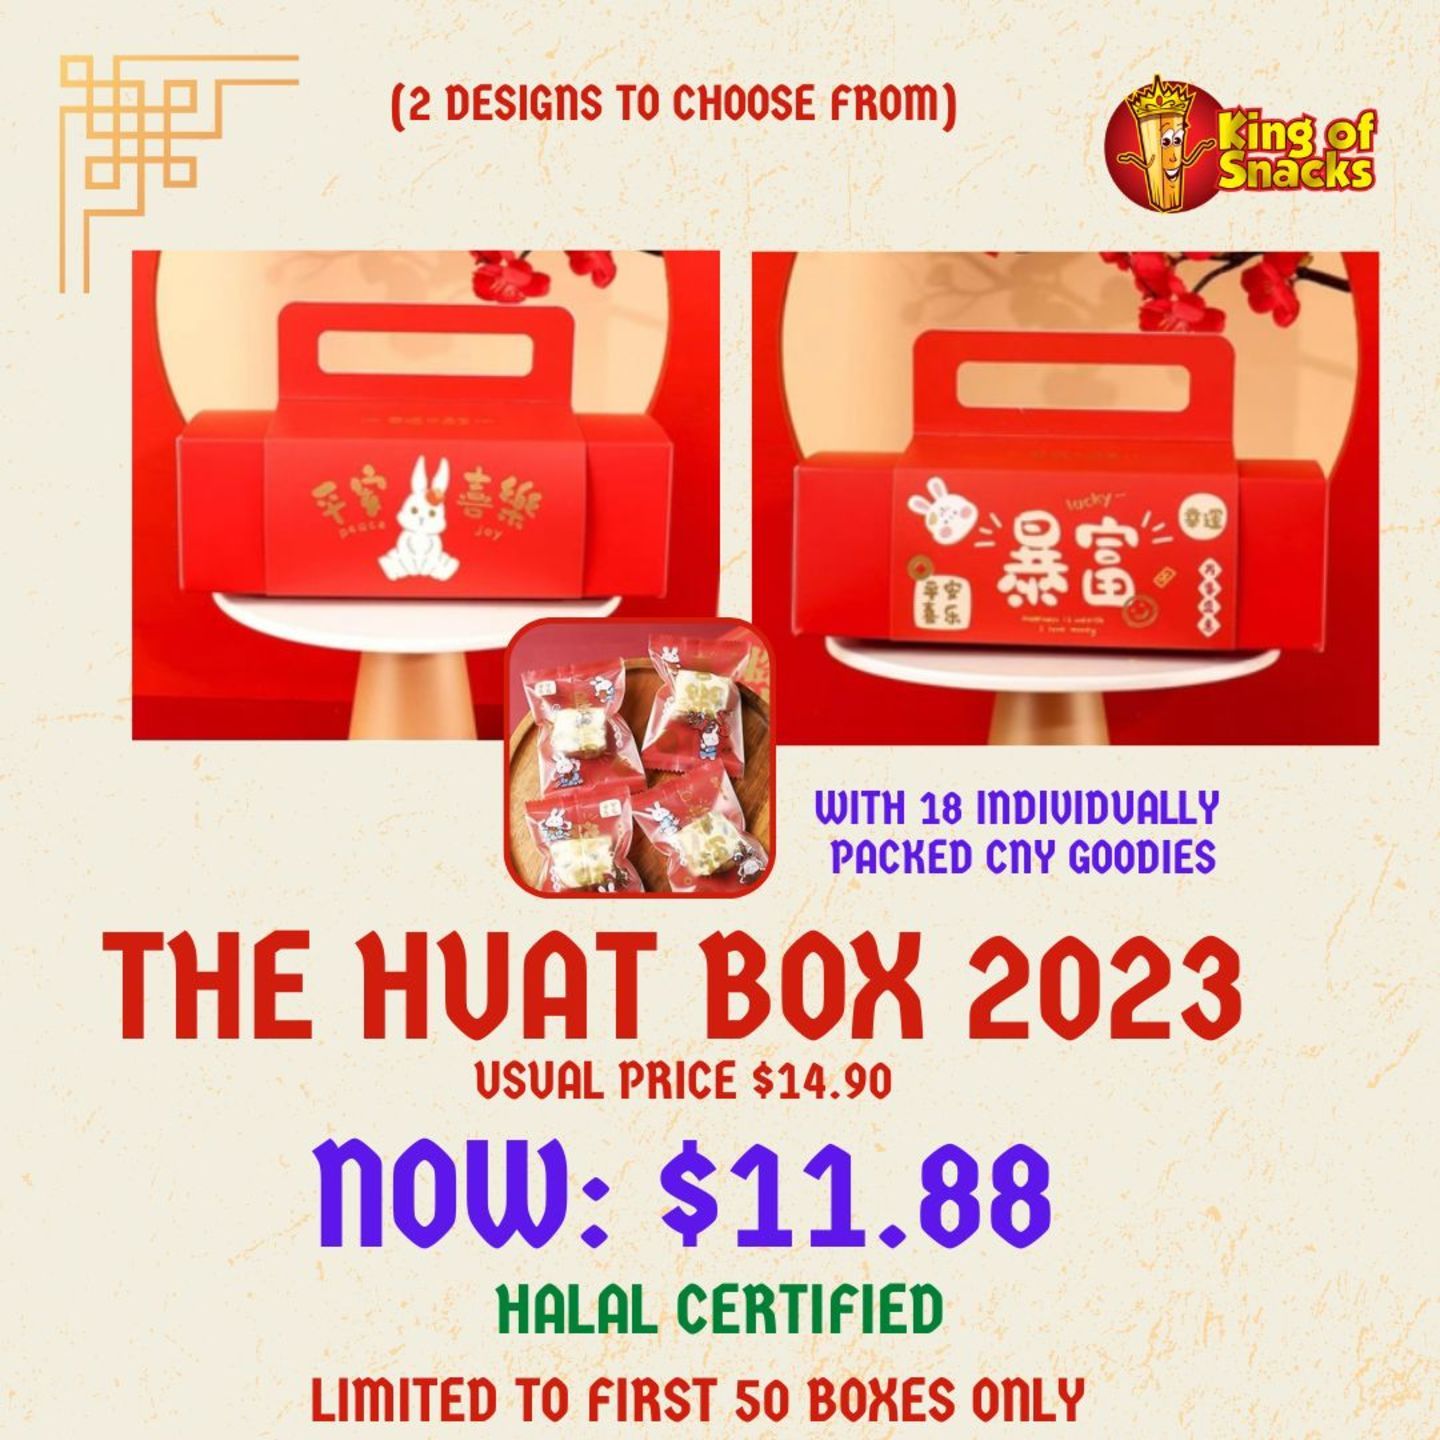 The Huat Box 2023 - 18 individual packed CNY cookies snacks Halal CNY goodies